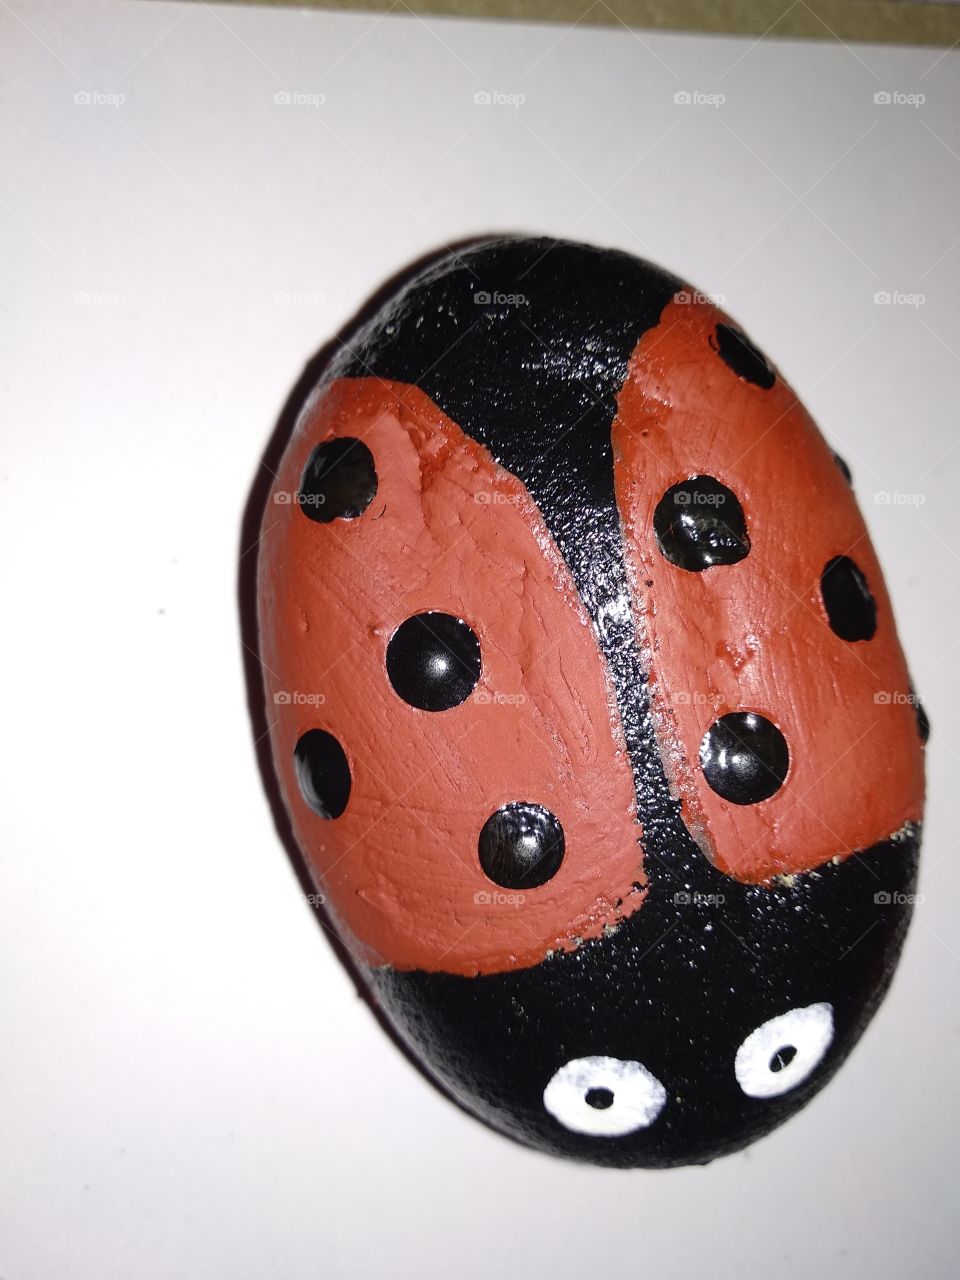 Paper weight..It's a Lady Bird on stone.
Be innovative enough to make something amazing like this.
Handmade stuff.